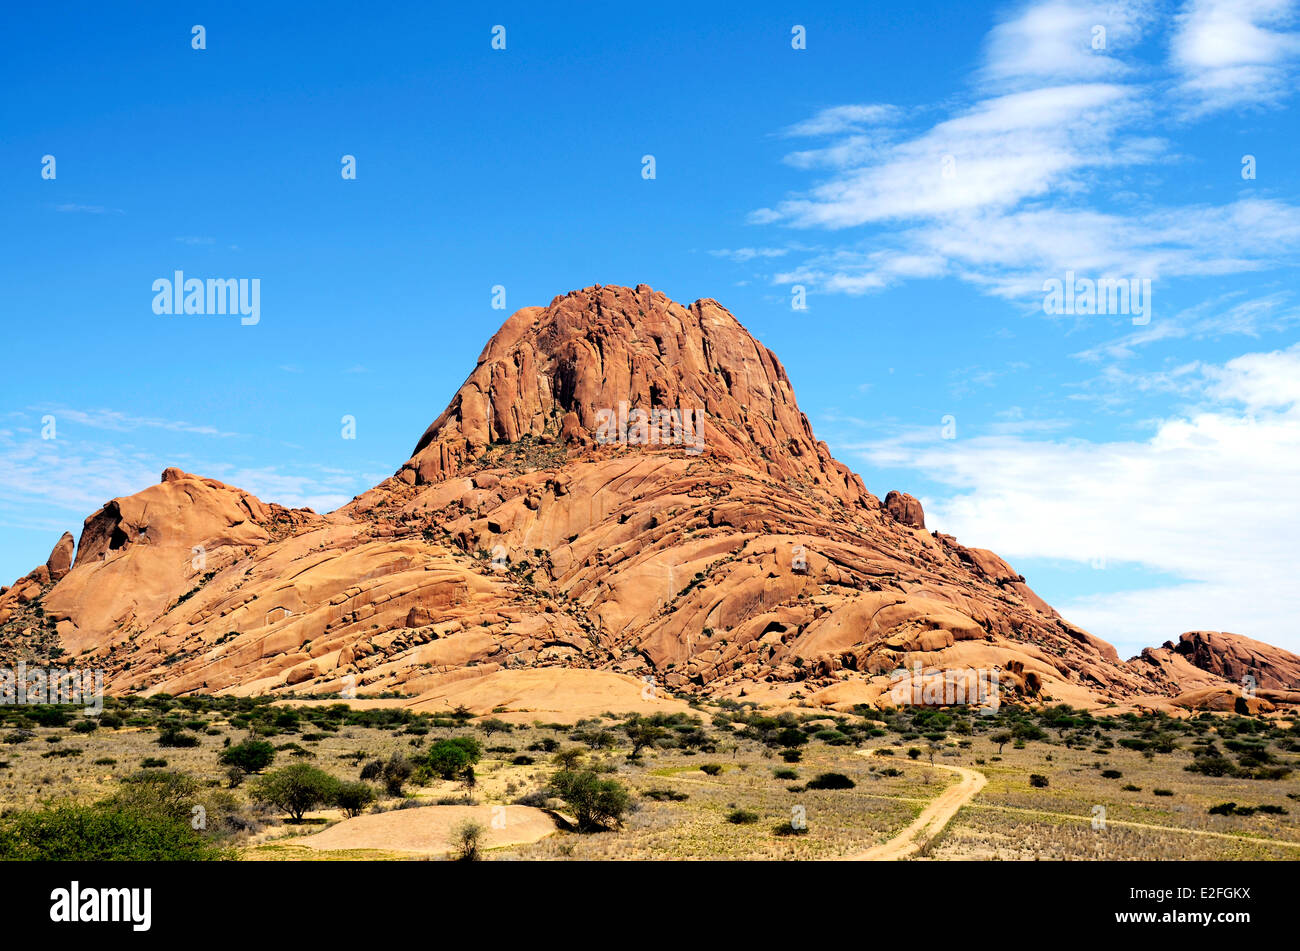 The african mountain Spitzkoppe in Namibia with blue sky above Stock Photo